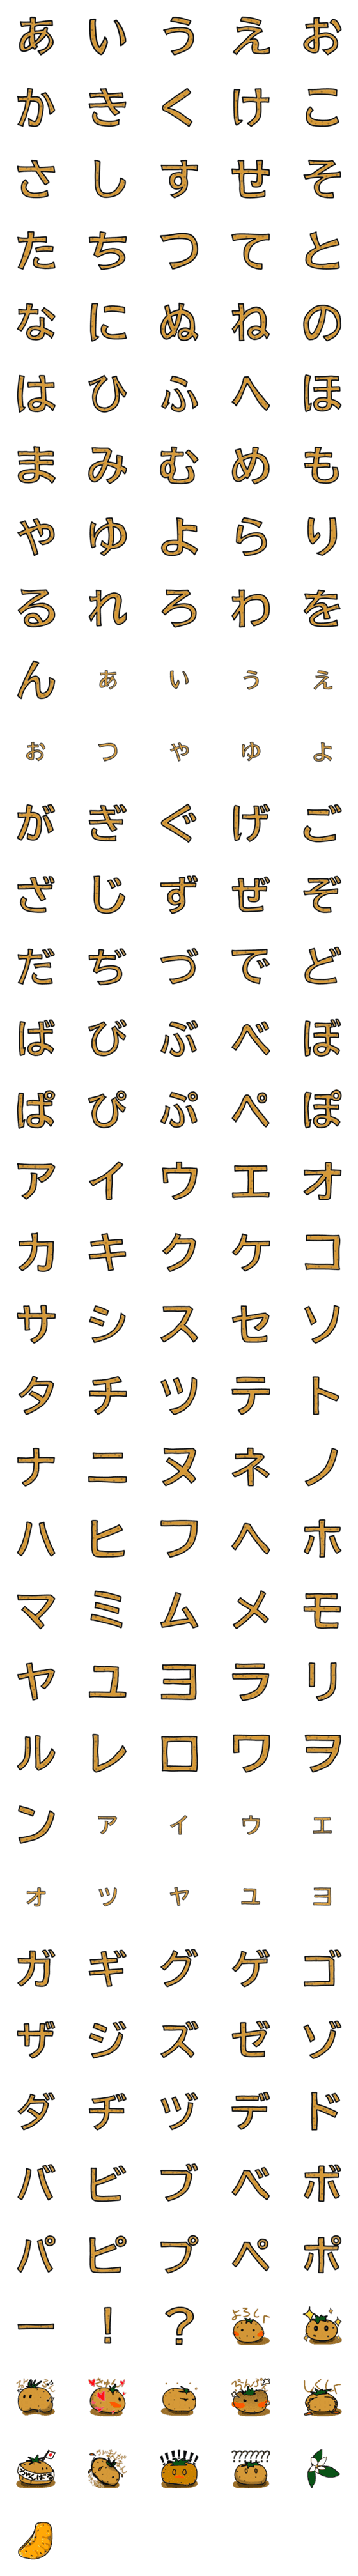 [LINE絵文字]みかんくんデコ文字＆絵文字の画像一覧